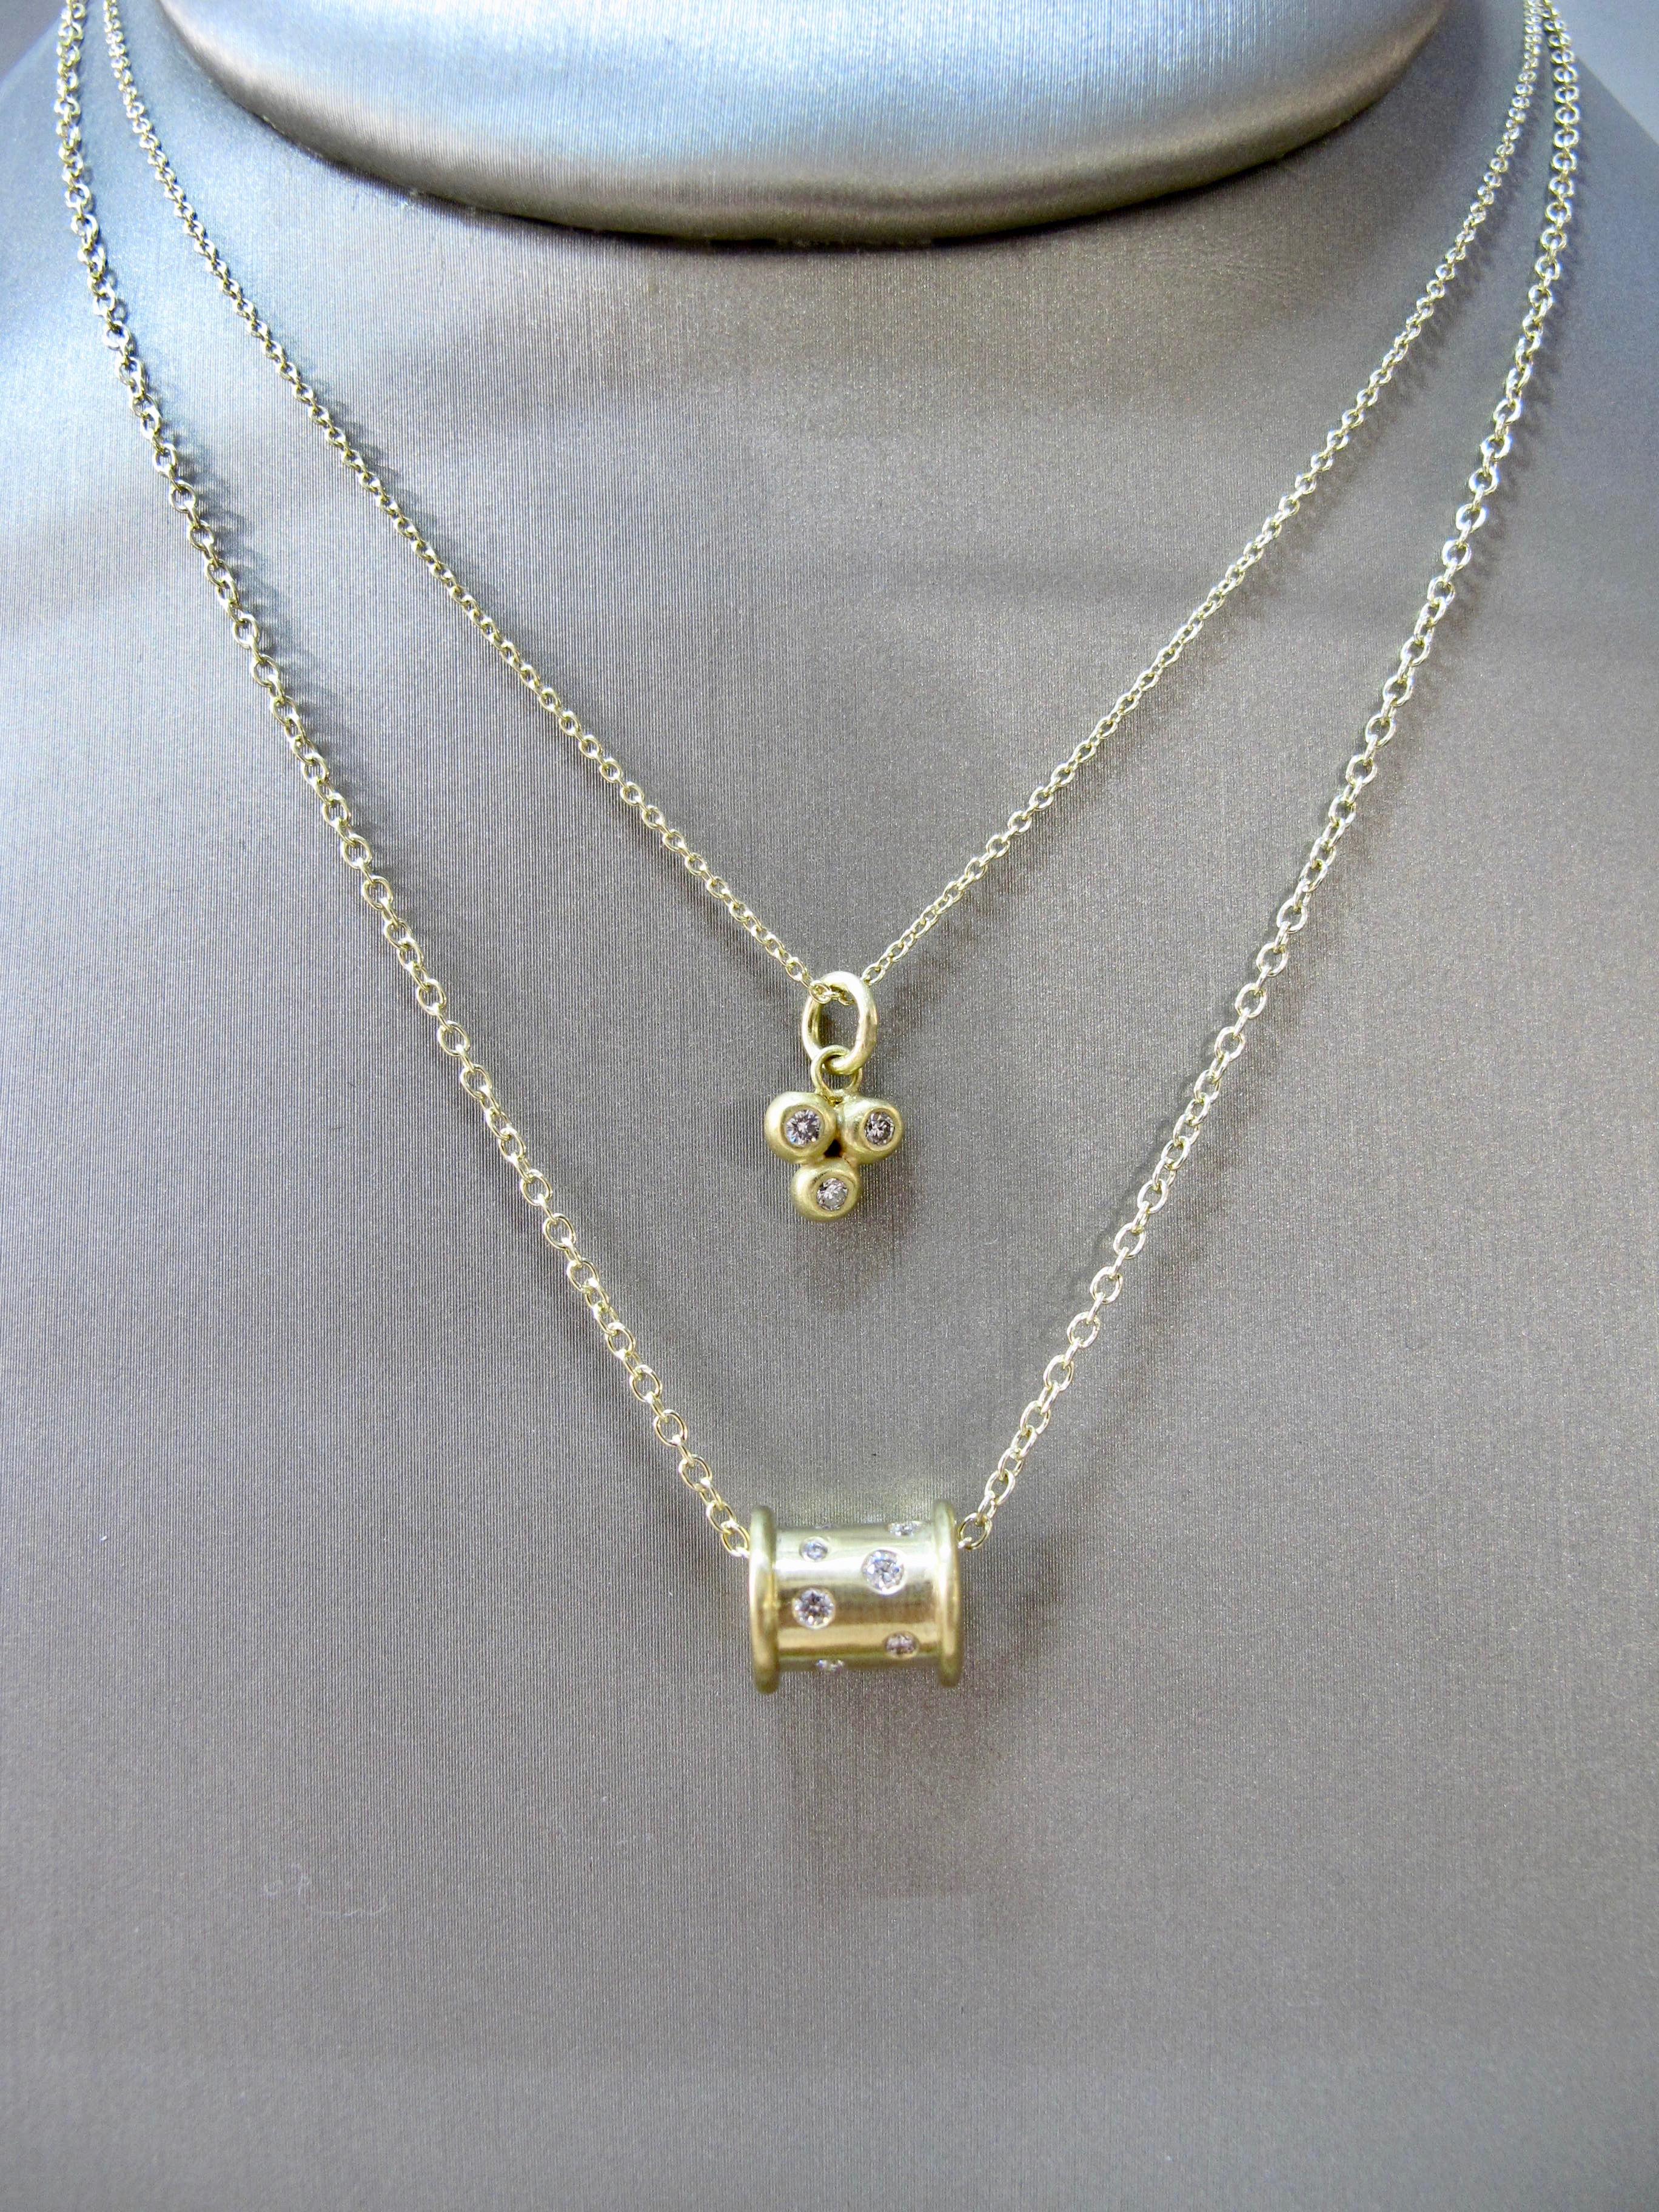 Faye Kim 18 Karat Gold Diamond Spool Necklace In New Condition For Sale In Westport, CT